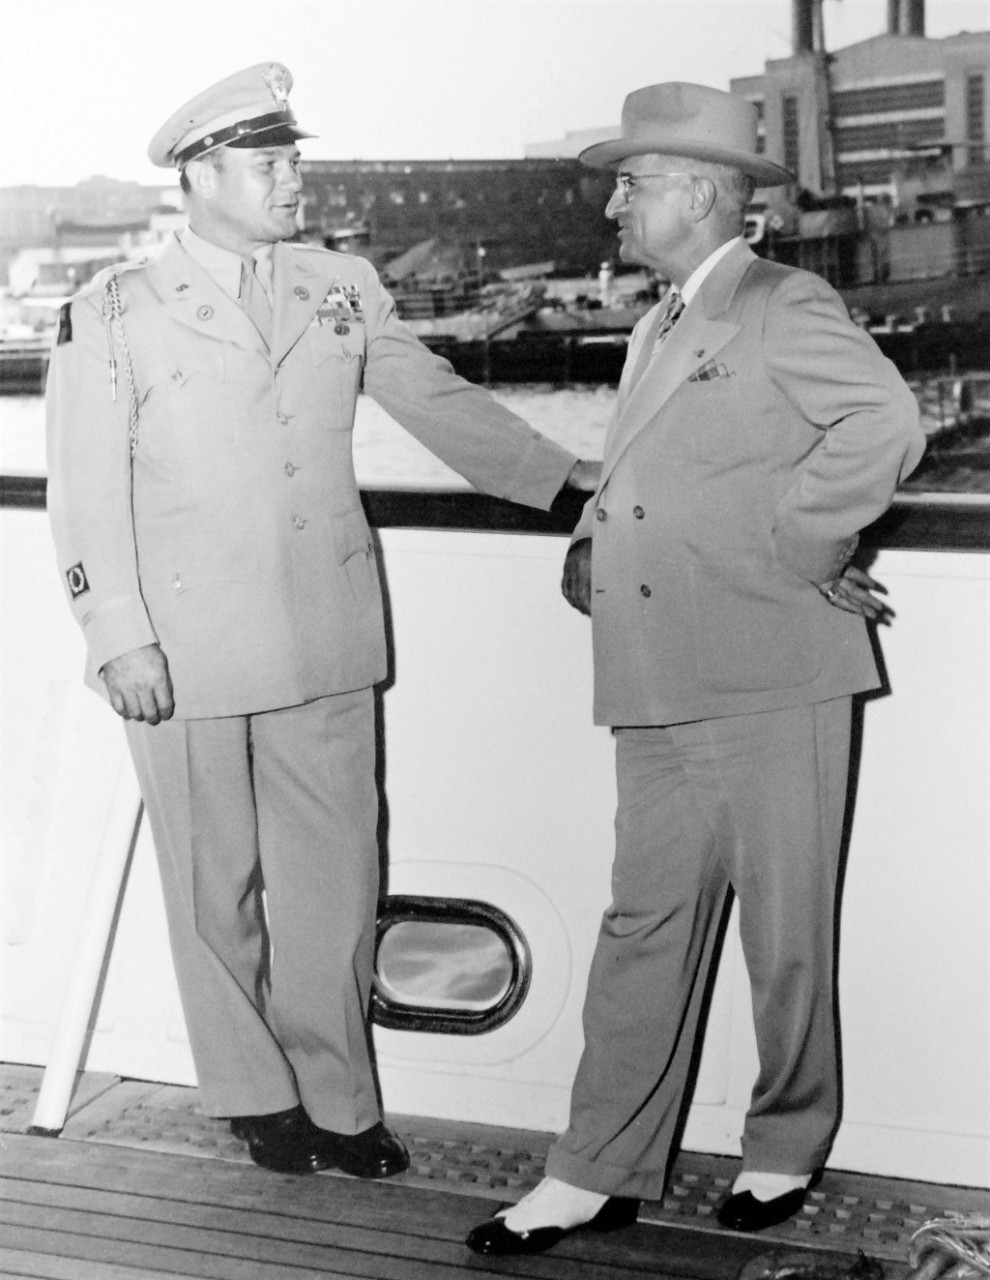 PR-CN-1972-185-Box-1-10:  President Harry S. Truman, Washington Navy Yard, 1948.   President Harry S. Truman and General Gordon Graham onboard Presidential yacht USS Williamsburg (AGC-369) at the Washington Navy Yard, August 29, 1948.   Fleet Admiral William D. Leahy Collection.  Courtesy of the Library of Congress.   